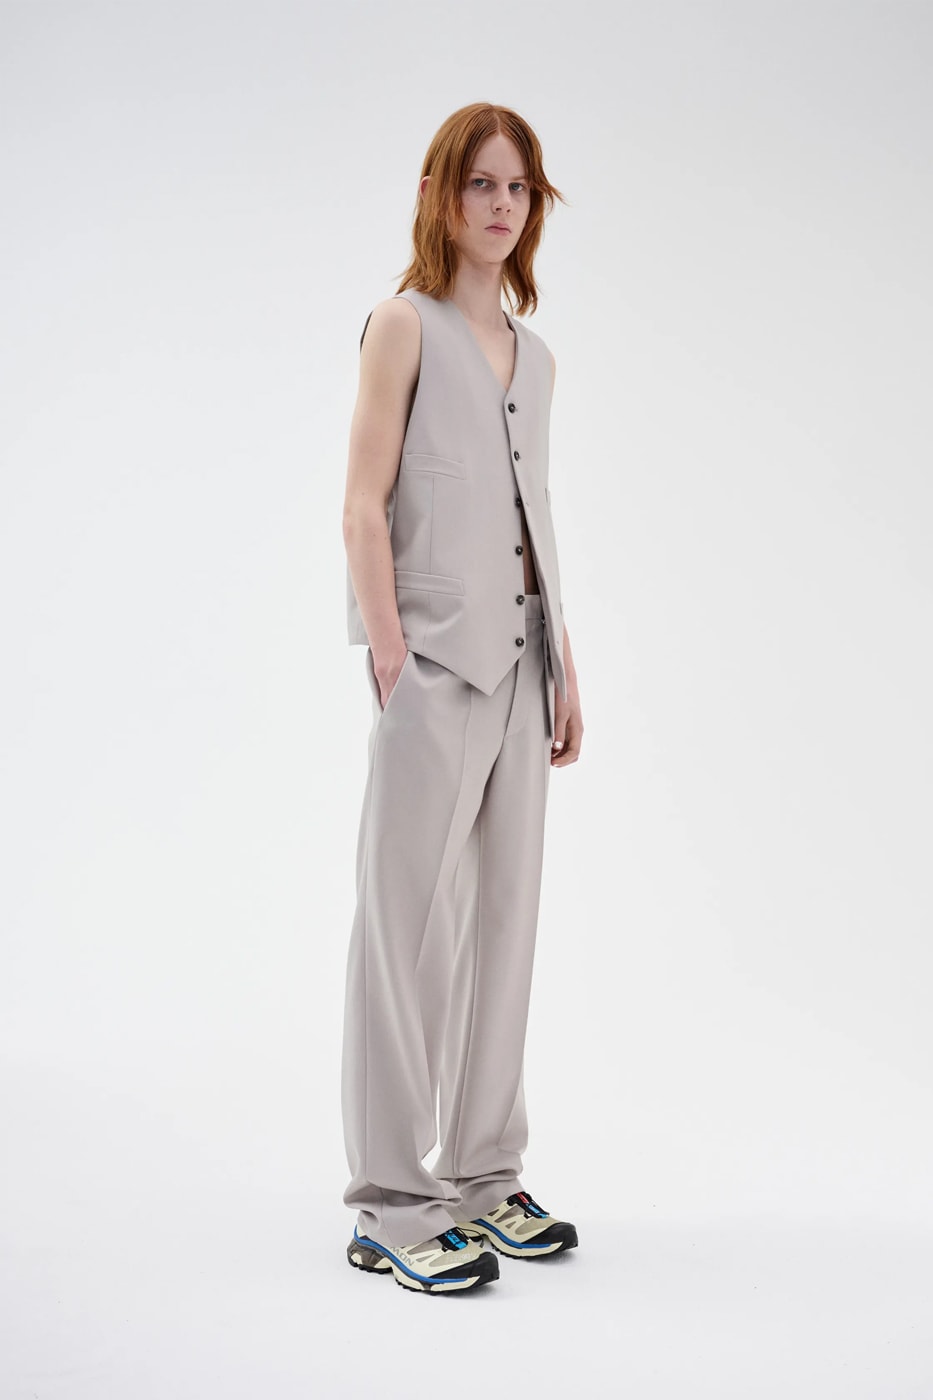 MM6 Maison Margiela Resort 2024 Is a Refreshing Take on Contemporary Tailoring collection release slouching jerseys denims subtle notes salomon